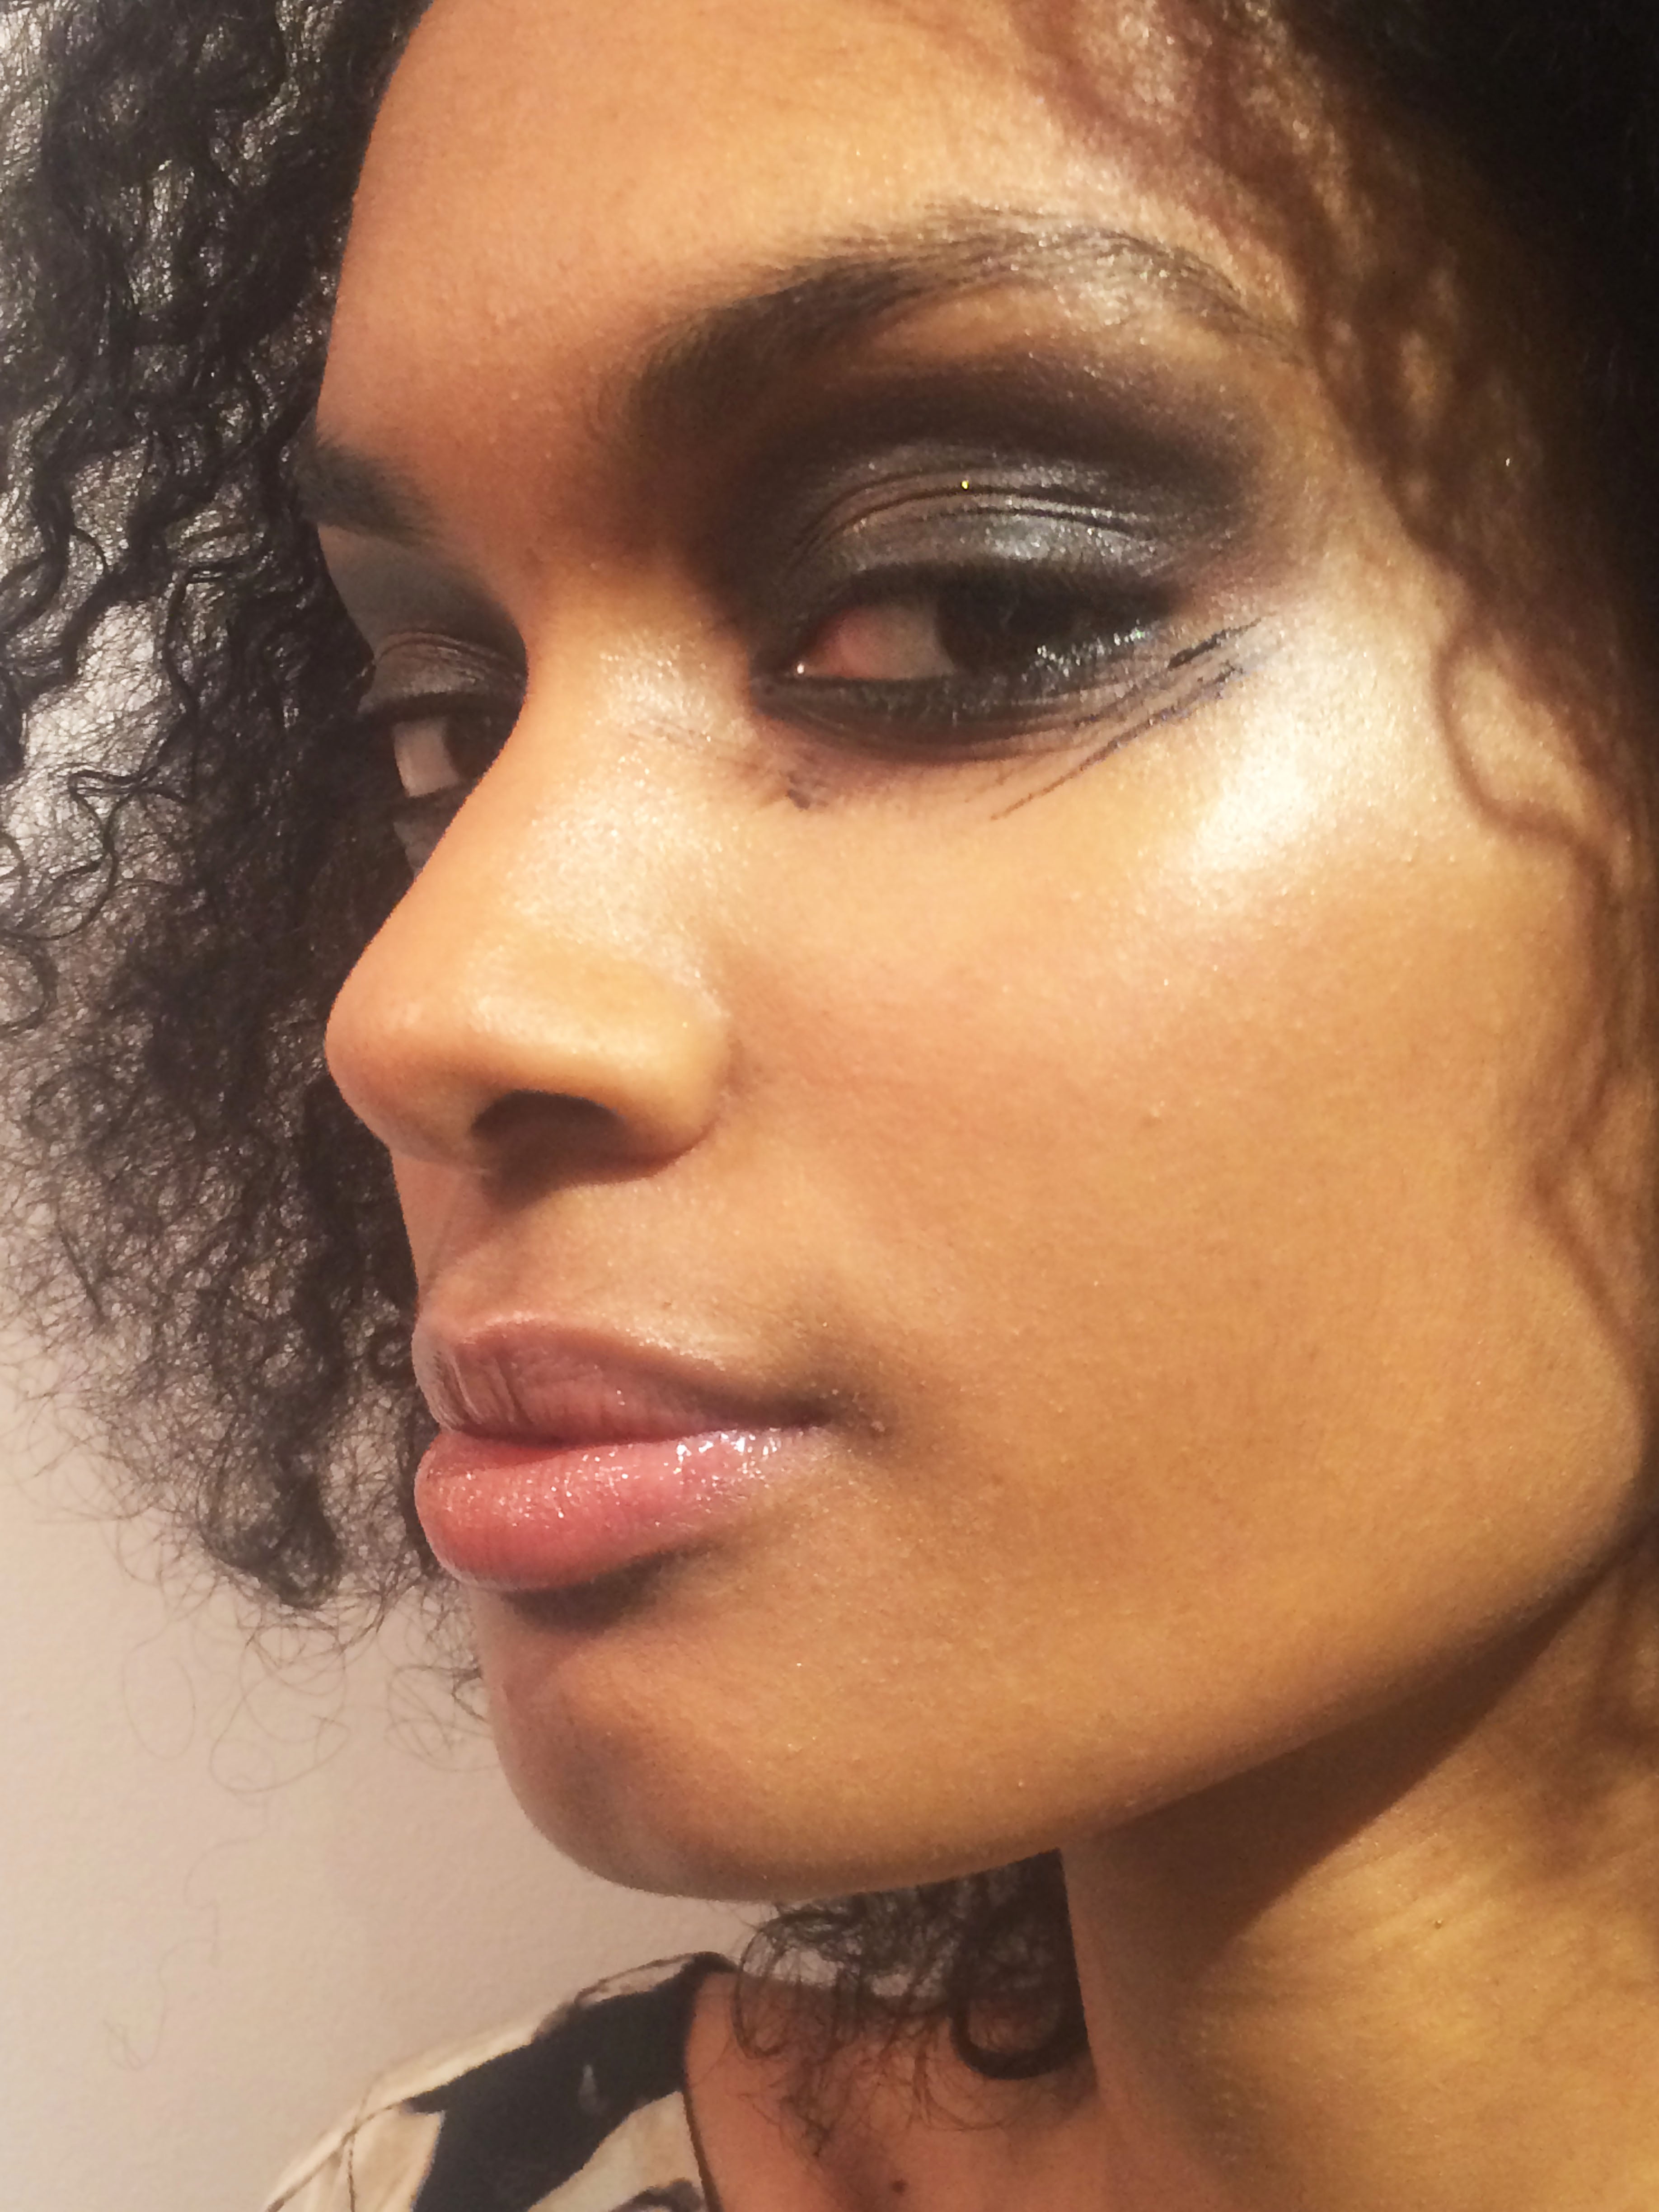 The Distressed Liner Look We're Obsessing Over Now